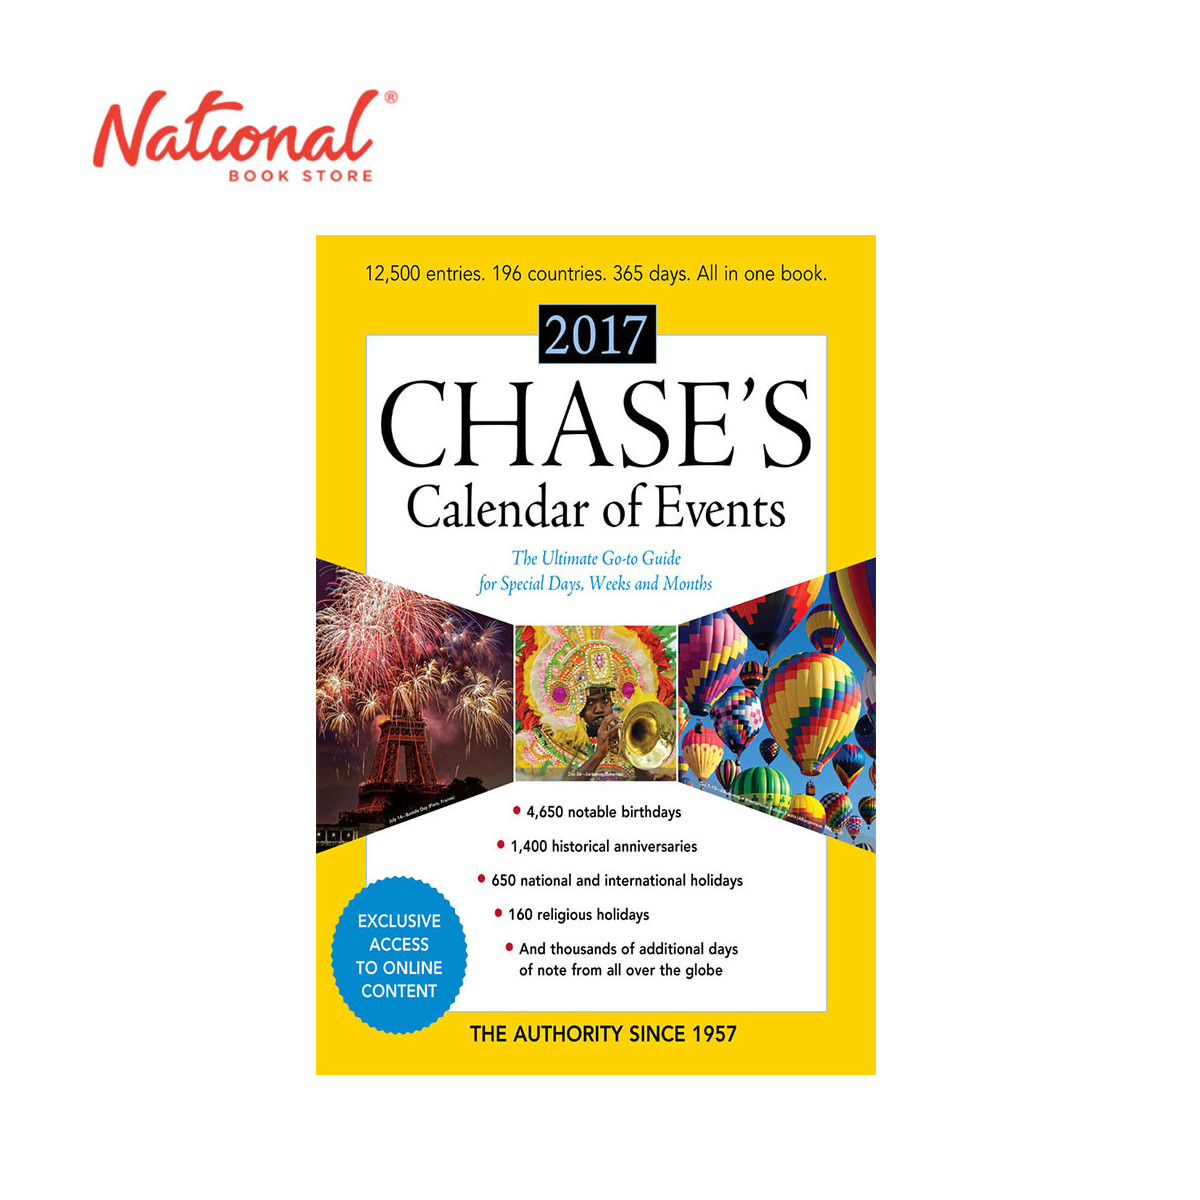 Chase Calendar of Events 2017 by Editors of Chase's - Trade Paperback